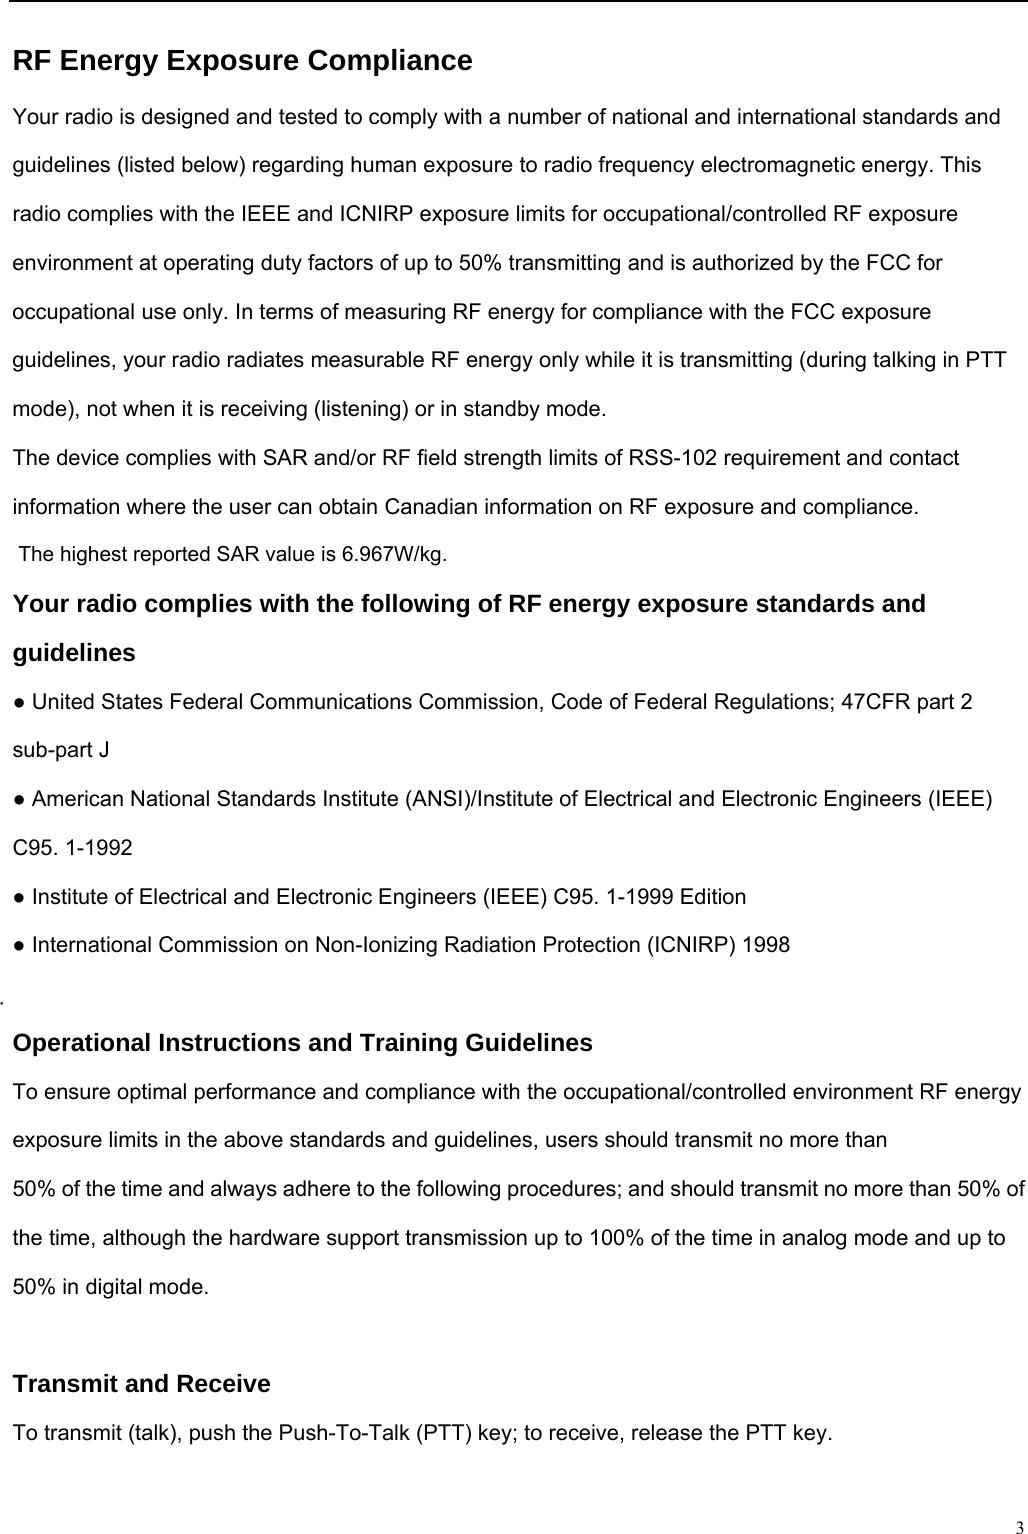                                                                                                              3RF Energy Exposure Compliance Your radio is designed and tested to comply with a number of national and international standards and guidelines (listed below) regarding human exposure to radio frequency electromagnetic energy. This radio complies with the IEEE and ICNIRP exposure limits for occupational/controlled RF exposure environment at operating duty factors of up to 50% transmitting and is authorized by the FCC for occupational use only. In terms of measuring RF energy for compliance with the FCC exposure guidelines, your radio radiates measurable RF energy only while it is transmitting (during talking in PTT mode), not when it is receiving (listening) or in standby mode. The device complies with SAR and/or RF field strength limits of RSS-102 requirement and contact information where the user can obtain Canadian information on RF exposure and compliance. The highest reported SAR value is 6.967W/kg. Your radio complies with the following of RF energy exposure standards and guidelines ● United States Federal Communications Commission, Code of Federal Regulations; 47CFR part 2 sub-part J ● American National Standards Institute (ANSI)/Institute of Electrical and Electronic Engineers (IEEE) C95. 1-1992 ● Institute of Electrical and Electronic Engineers (IEEE) C95. 1-1999 Edition ● International Commission on Non-Ionizing Radiation Protection (ICNIRP) 1998  Operational Instructions and Training Guidelines To ensure optimal performance and compliance with the occupational/controlled environment RF energy exposure limits in the above standards and guidelines, users should transmit no more than 50% of the time and always adhere to the following procedures; and should transmit no more than 50% of the time, although the hardware support transmission up to 100% of the time in analog mode and up to 50% in digital mode.  Transmit and Receive To transmit (talk), push the Push-To-Talk (PTT) key; to receive, release the PTT key.  